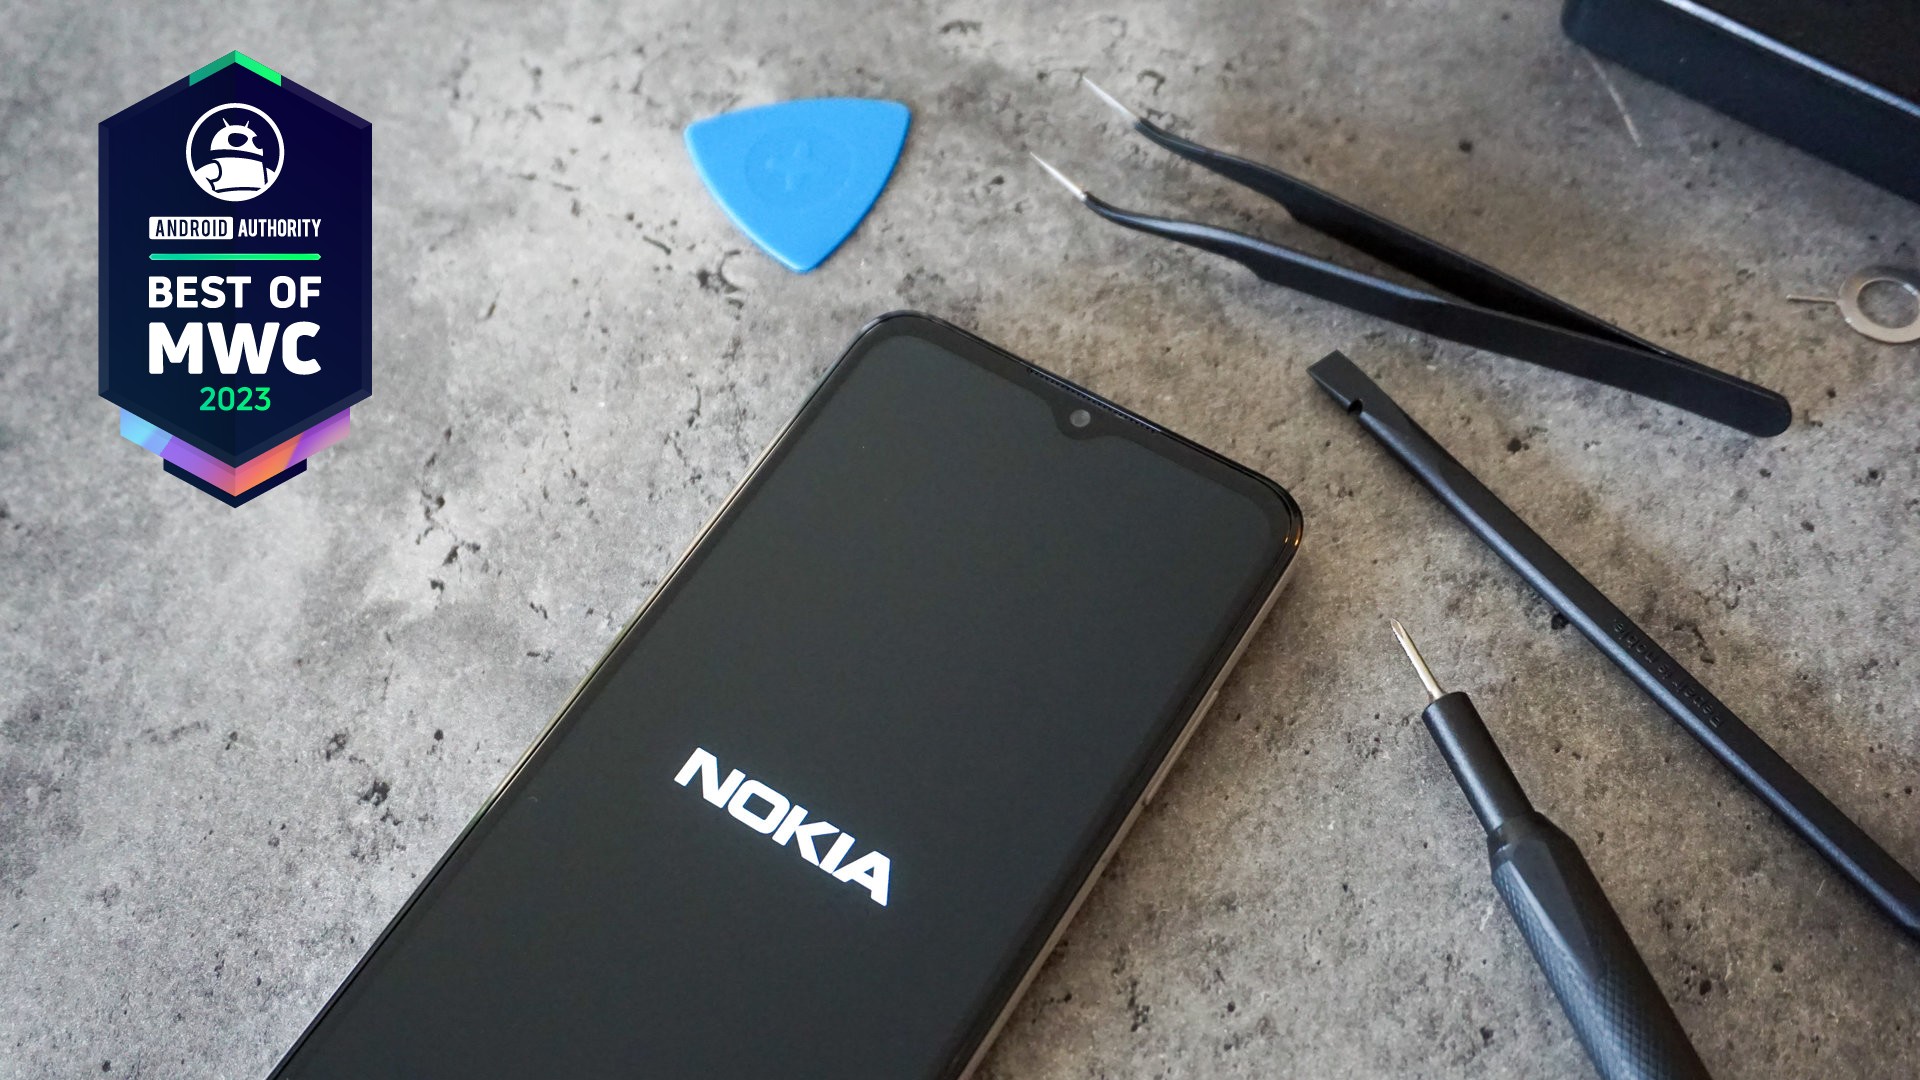 nokia g22 ifixit battery replacement best of mwc 2023